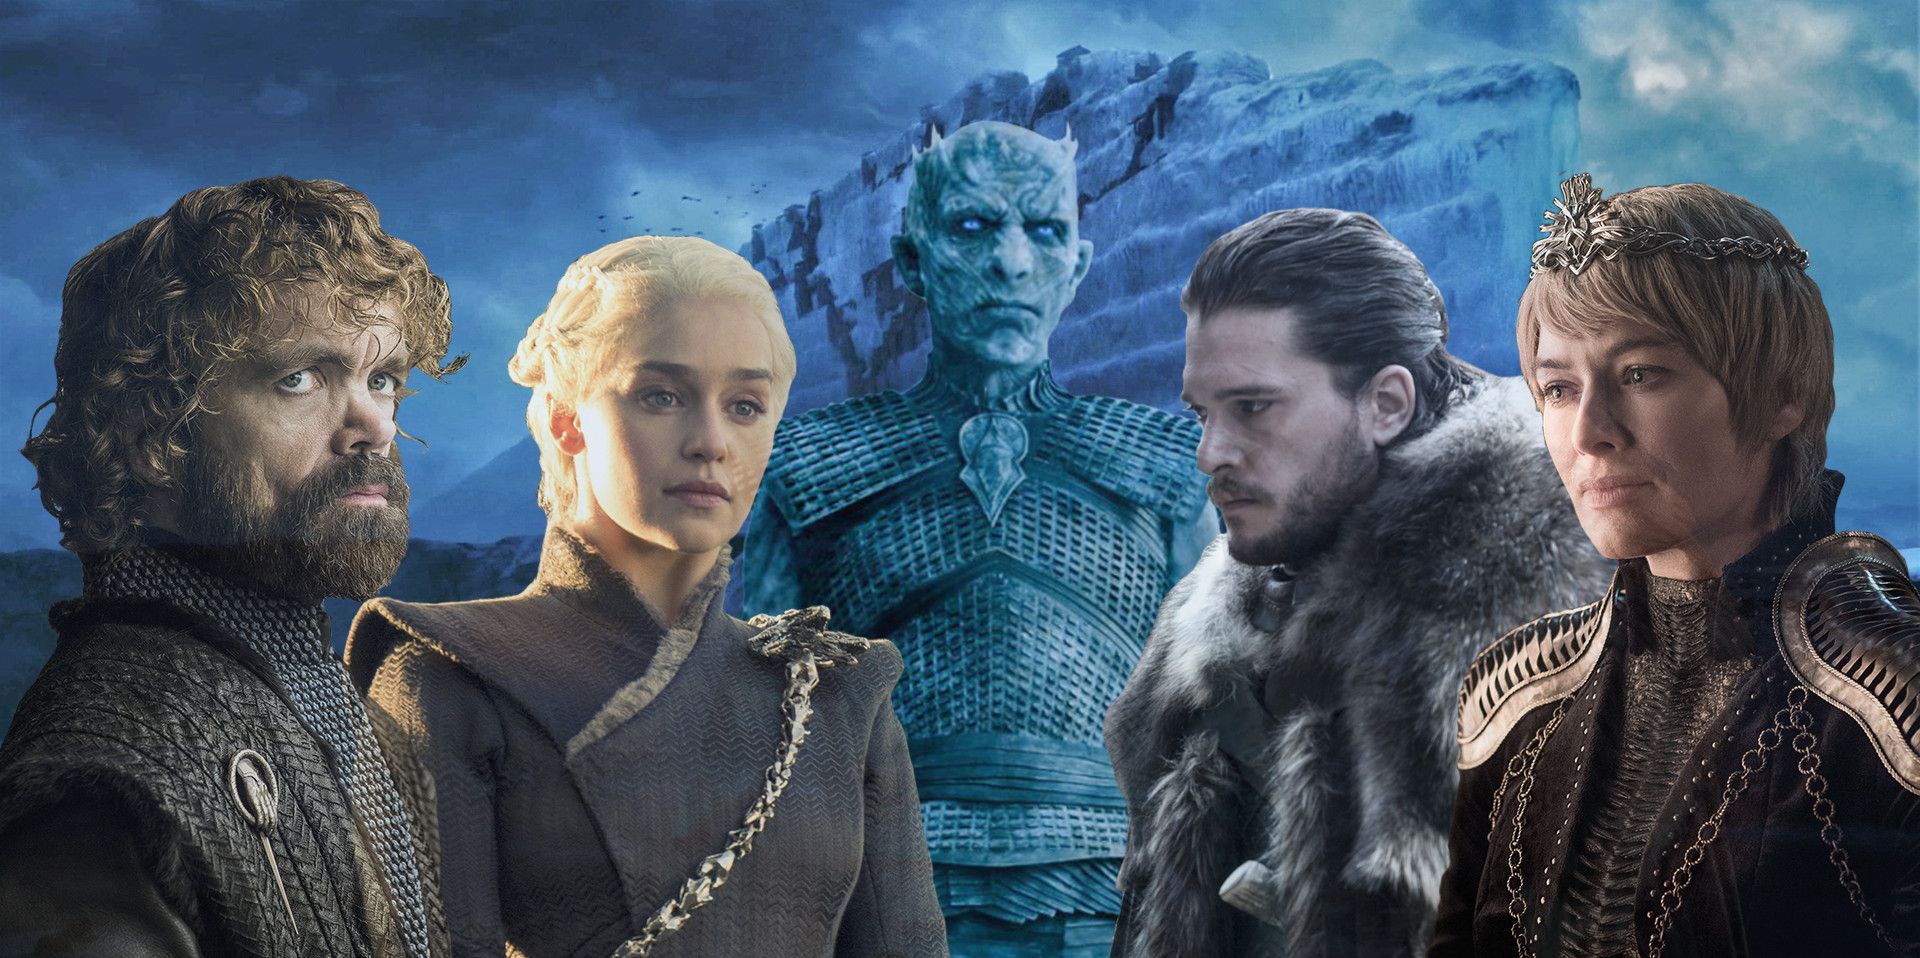 Game of Thrones Season 8 Leaks: Why Are There So Many Leaks?